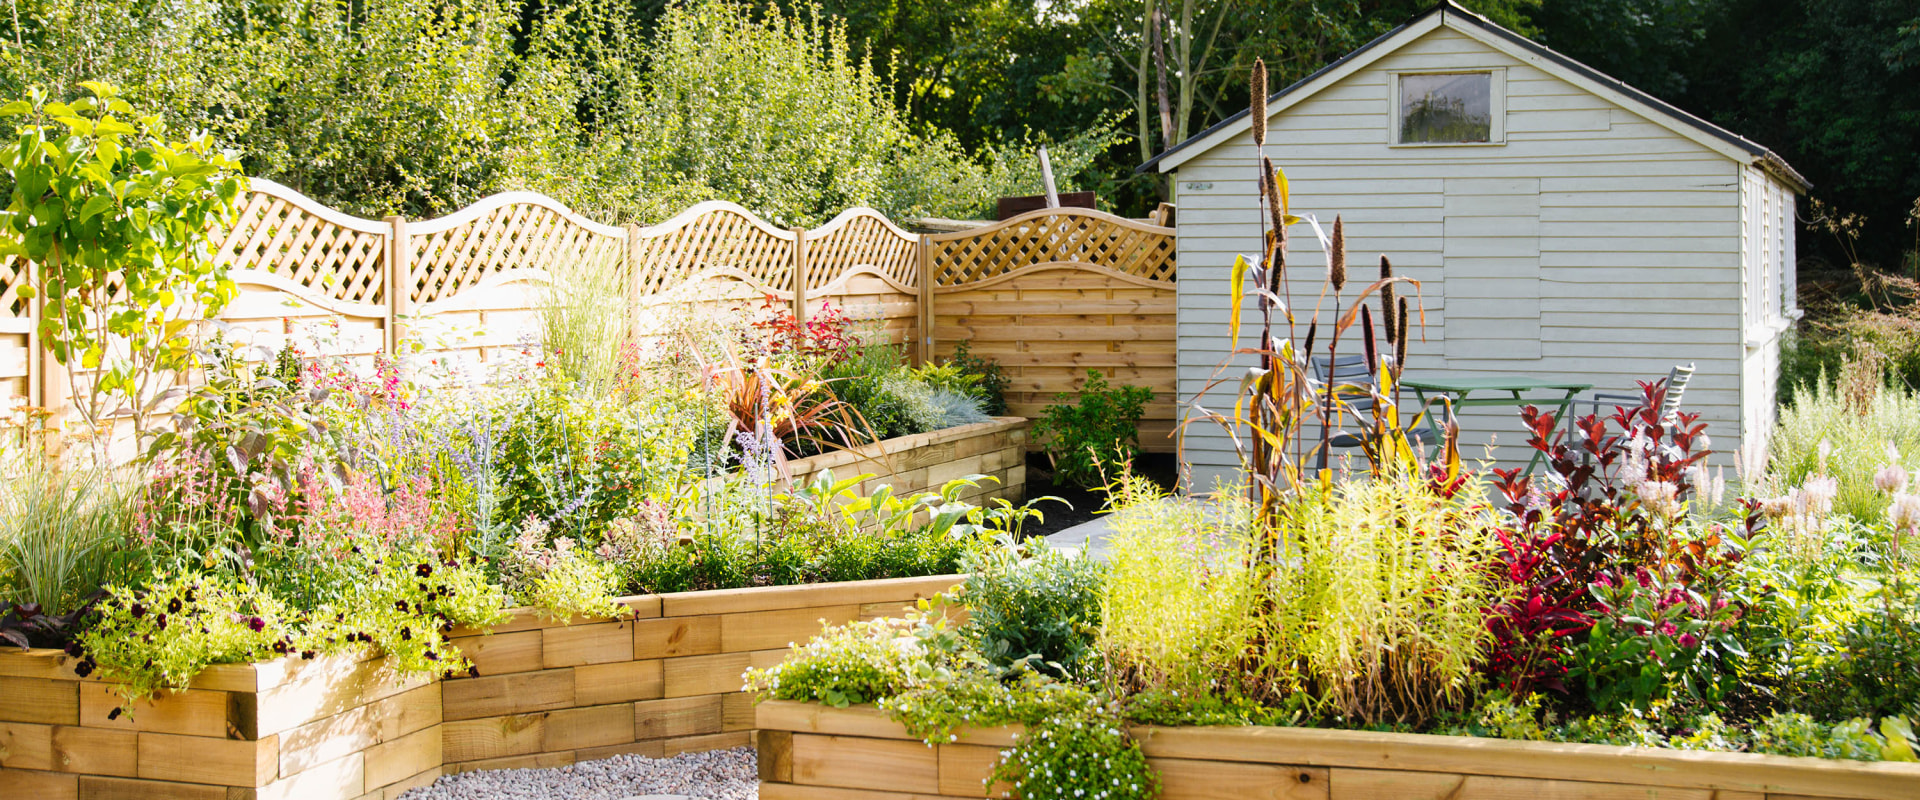 How to make your garden low maintenance?